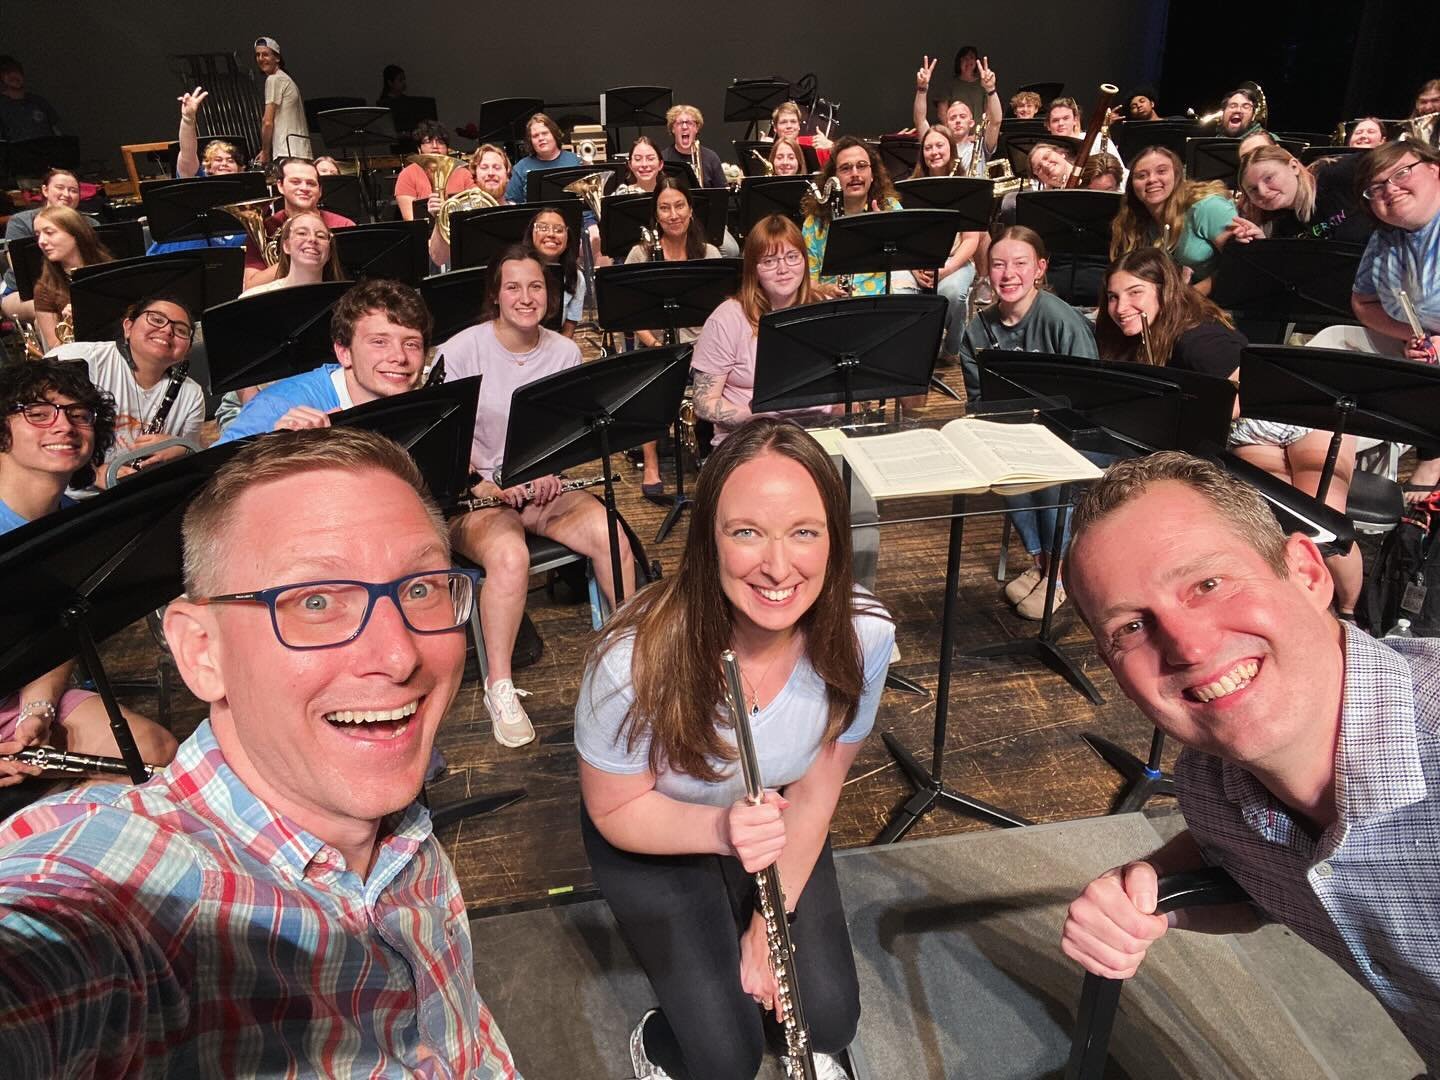 Great dress rehearsal last night of my Flute Concerto with Angela Collier Reynolds, Eric Scott, and the Indiana State University Wind Orchestra! Show is tonight at 7:30 PM! 
⚜️
L&rsquo;HISTOIRE DE LA NOUVELLE ORL&Eacute;ANS (2023)
Concerto for Flute 